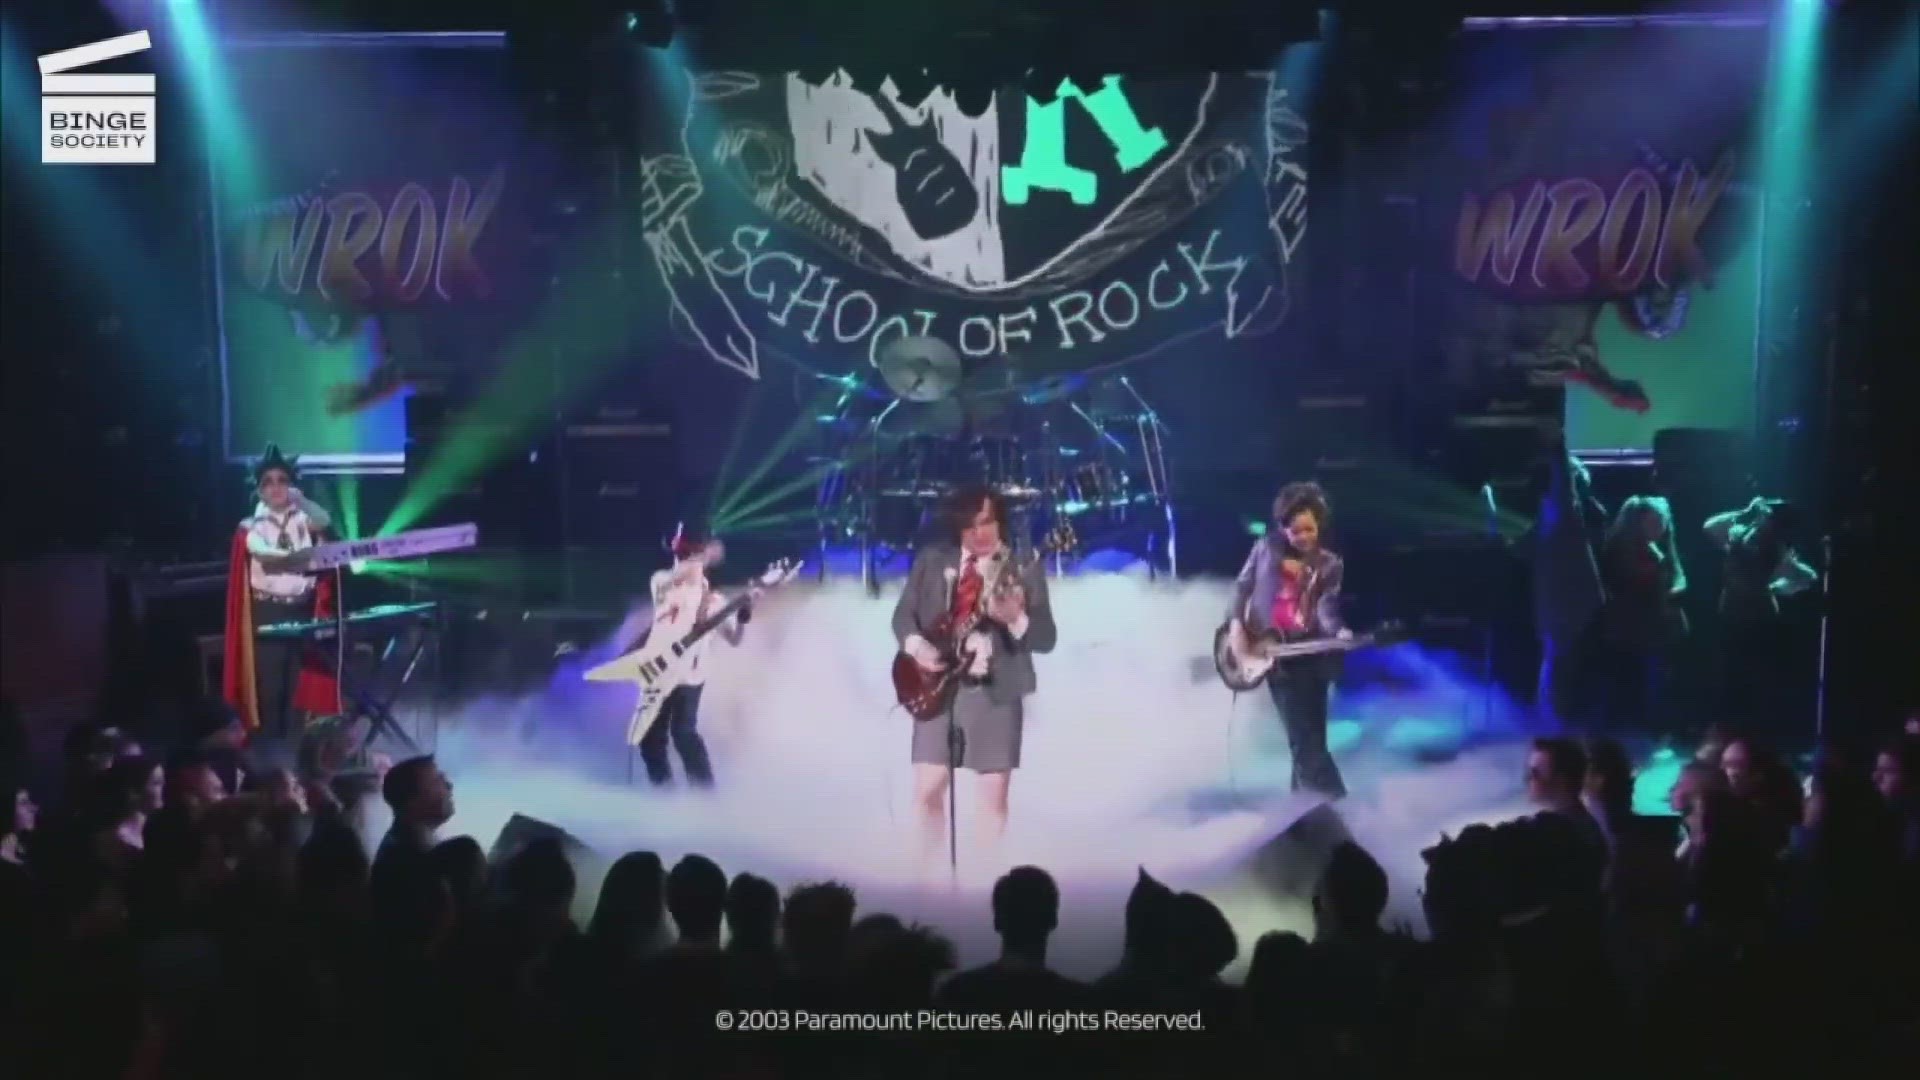 School of Rock in Vacaville has an online and in-person music program for all ages.